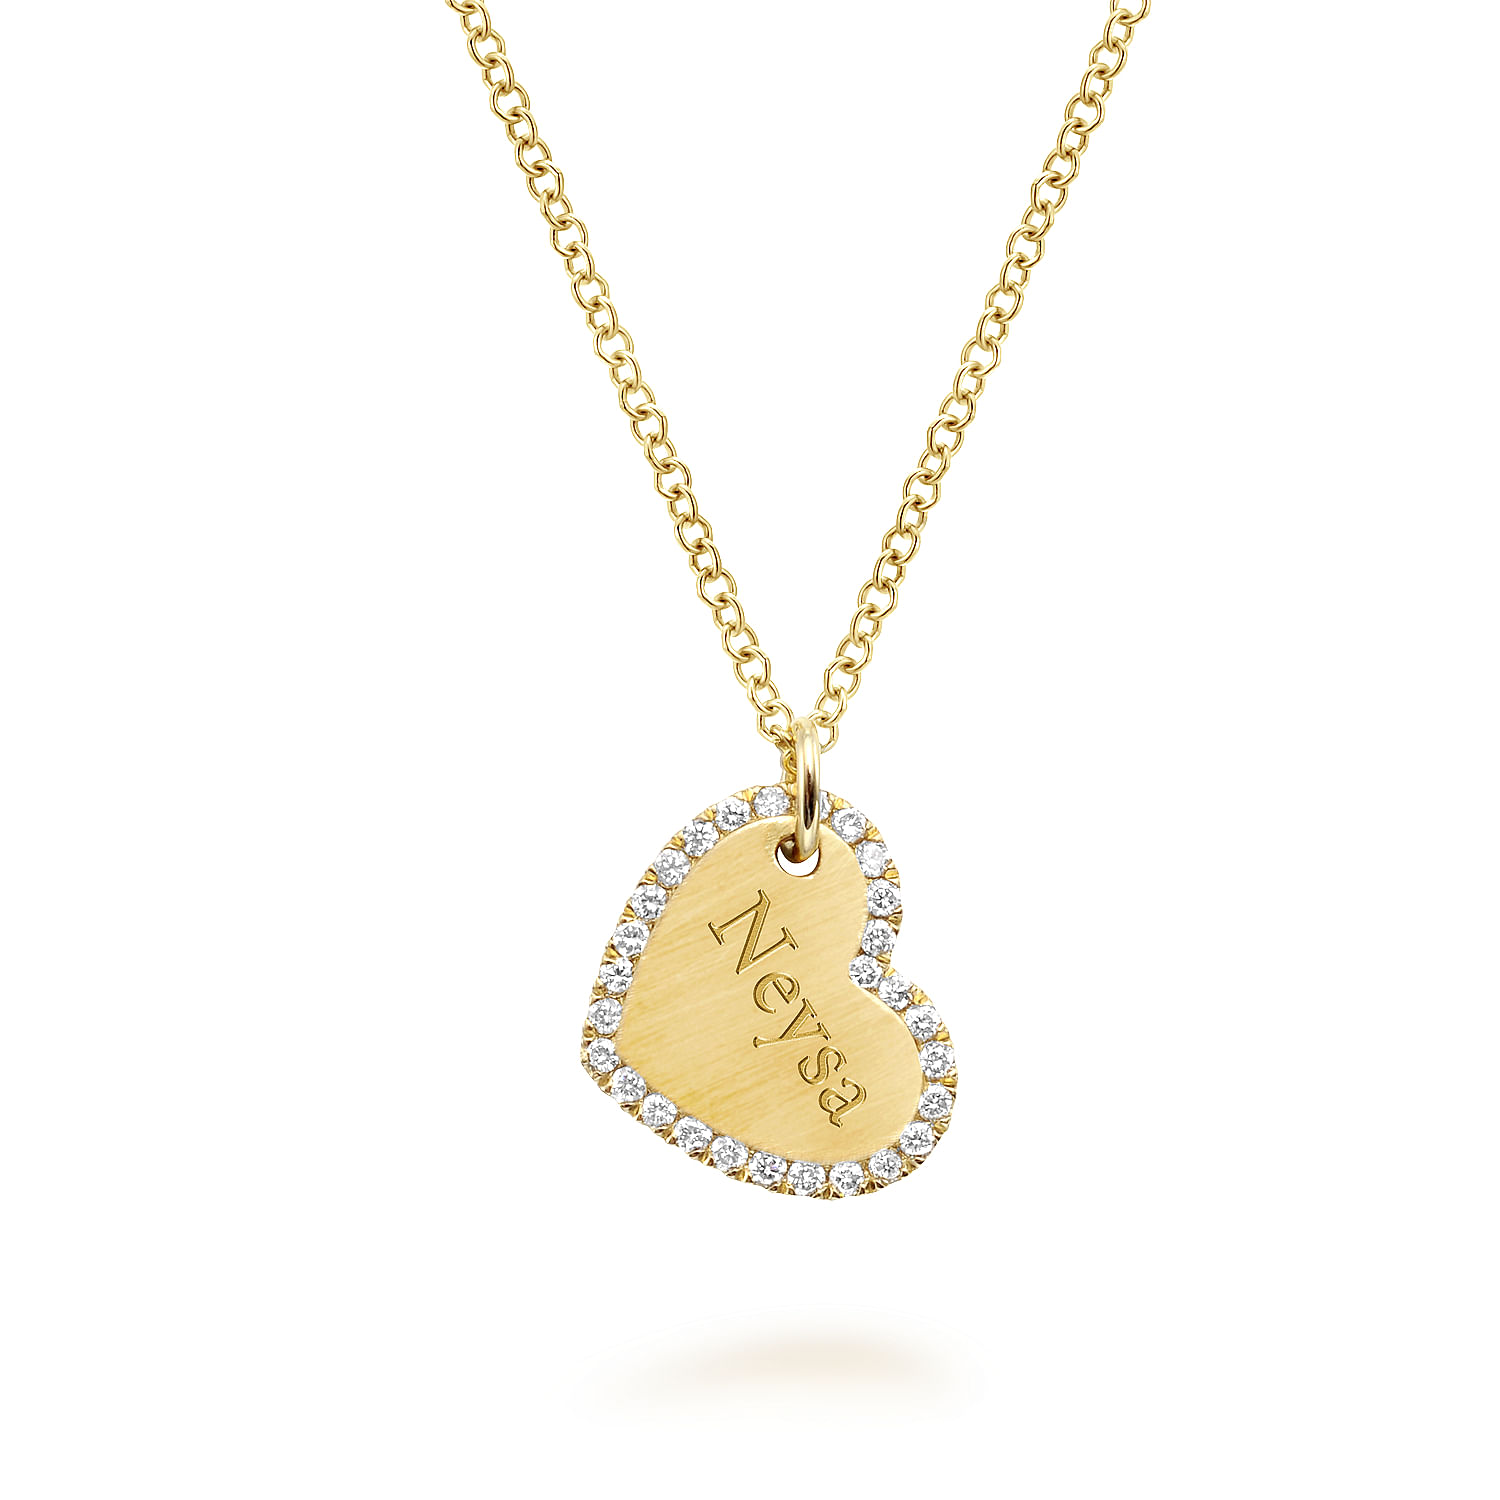 Sideways 14K Yellow Gold Engraved Heart Pendant Necklace with Diamond Frame